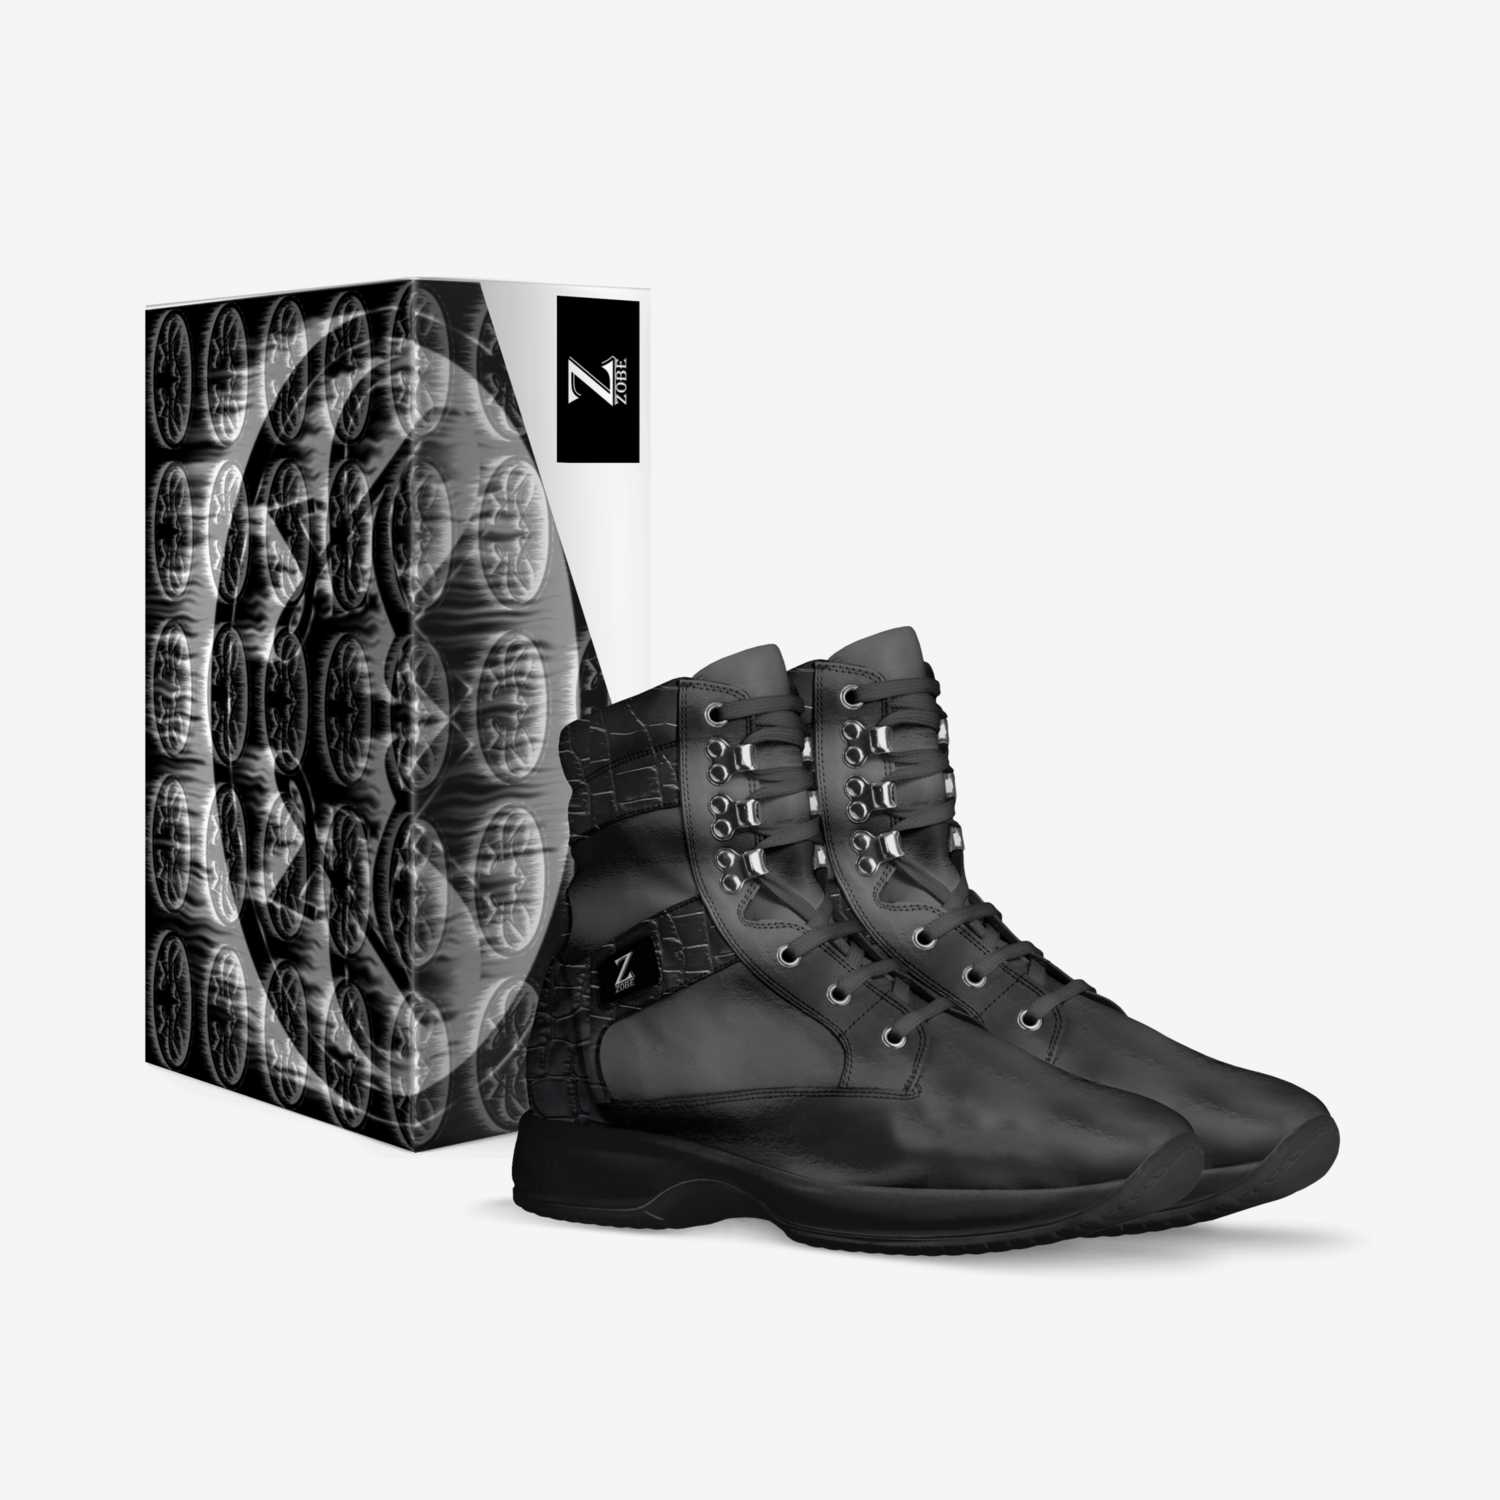 Zobe Boots custom made in Italy shoes by Alonzo Black | Box view